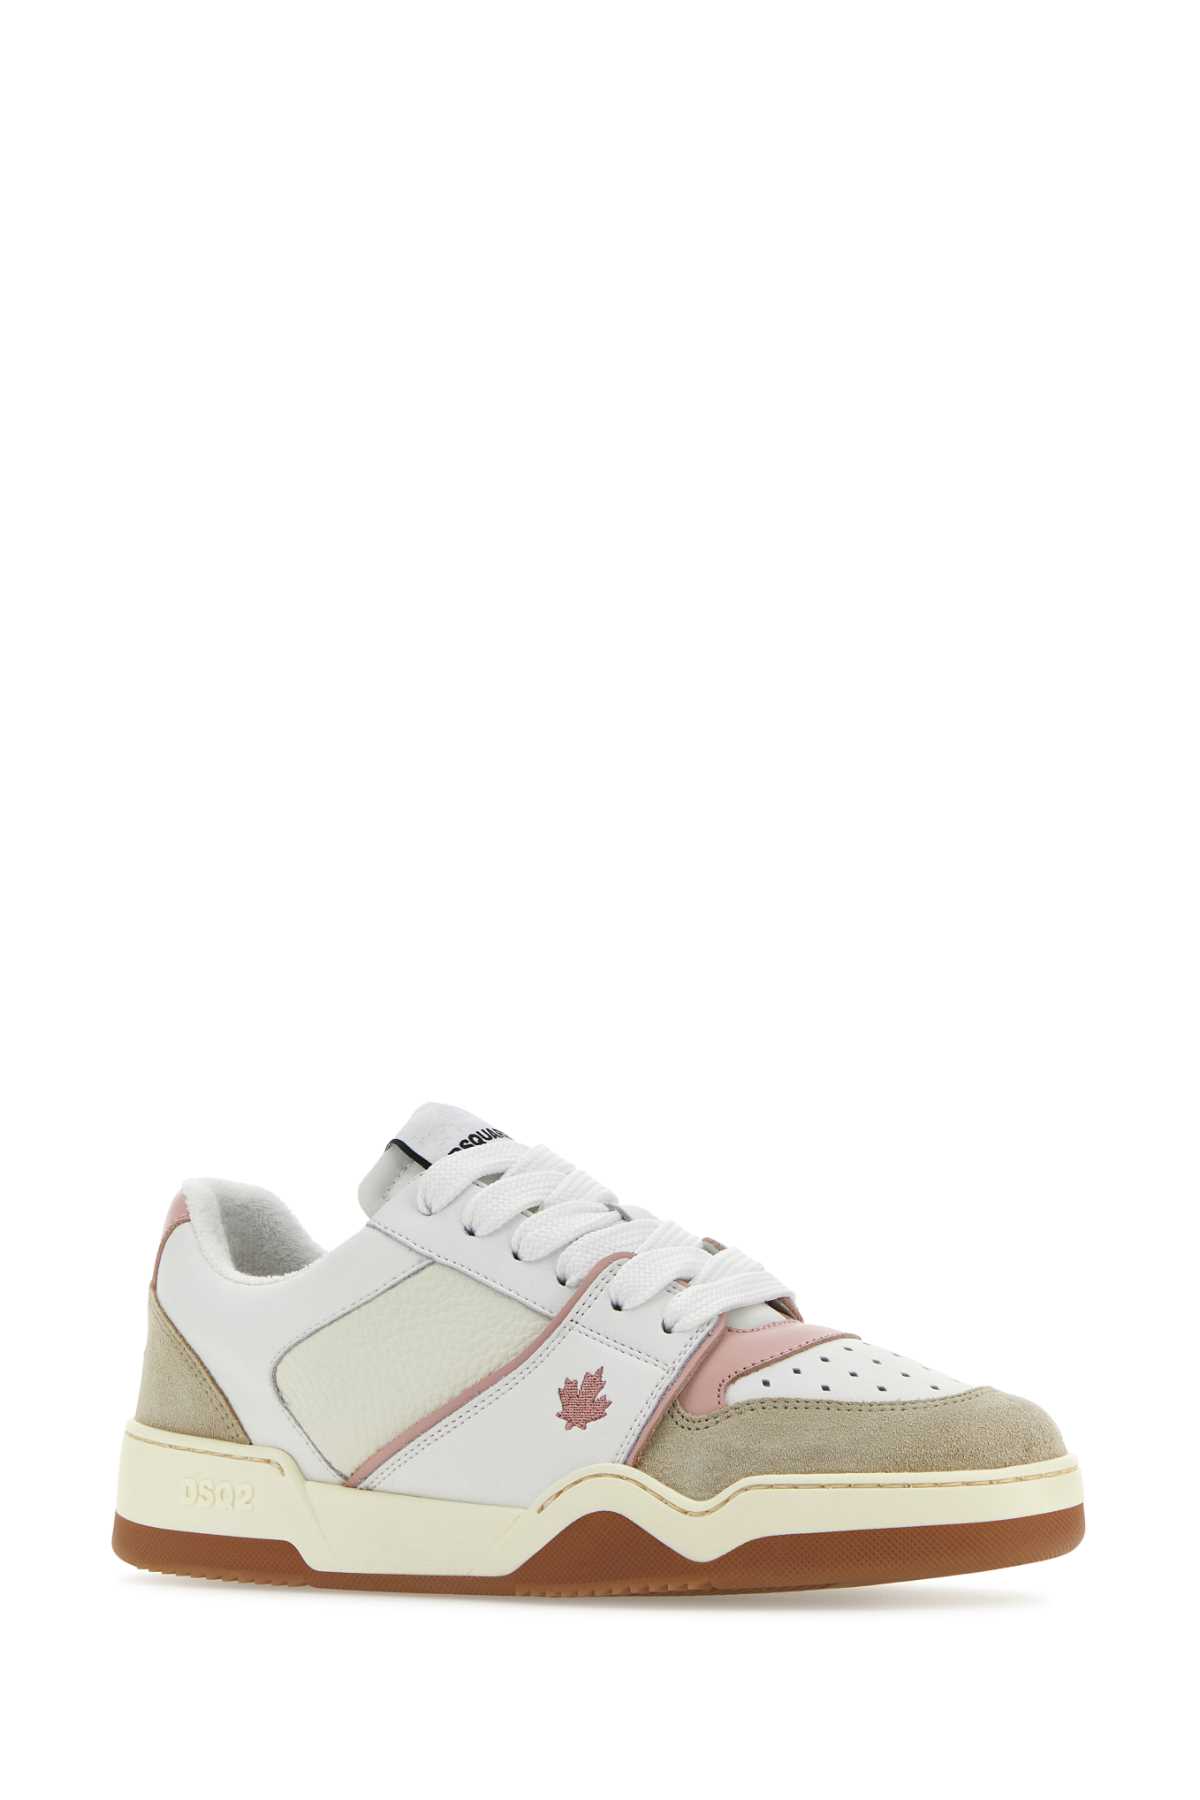 DSQUARED2 MULTICOLOR LEATHER AND SUEDE SPIKER SNEAKERS